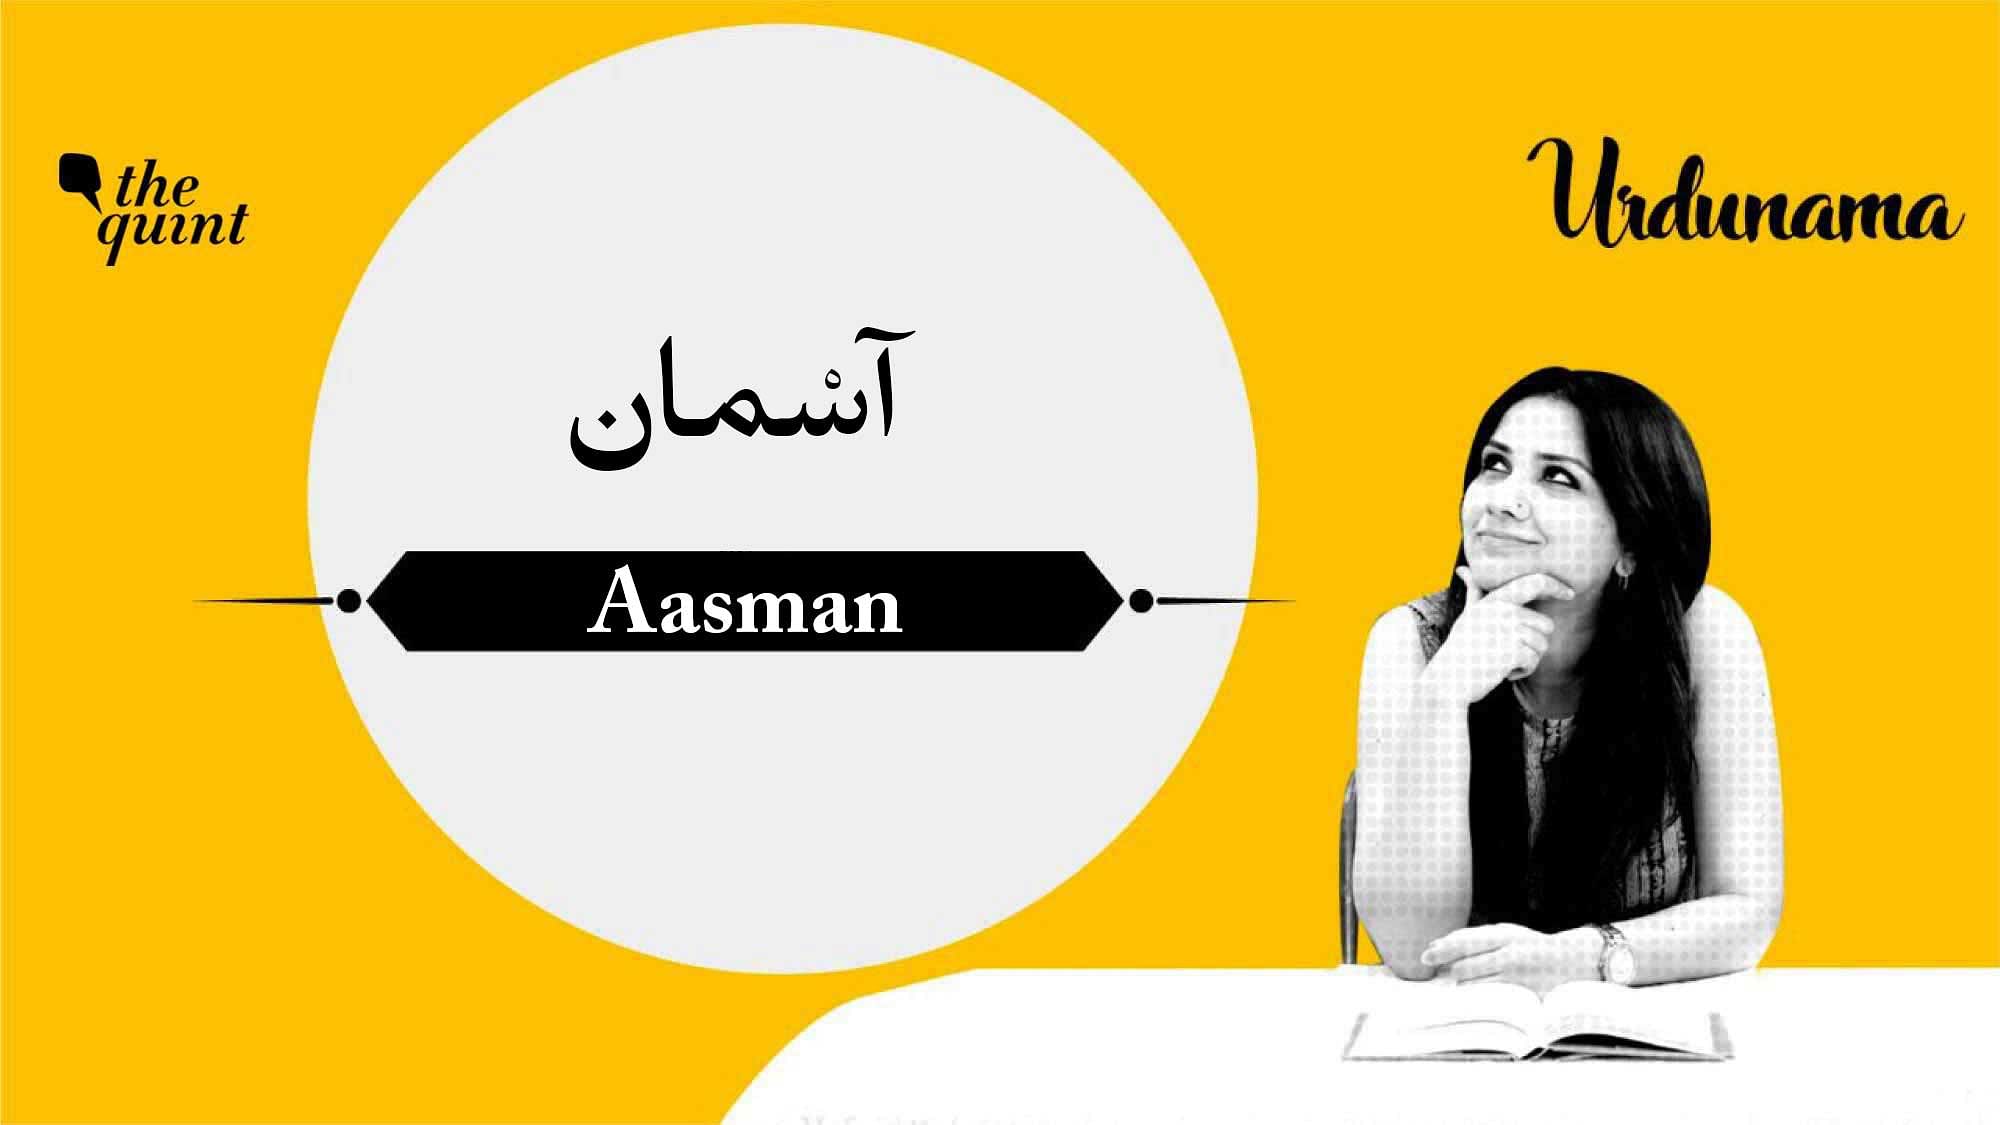 <div class="paragraphs"><p>We explore the many meanings of Aasman in this episode</p></div>